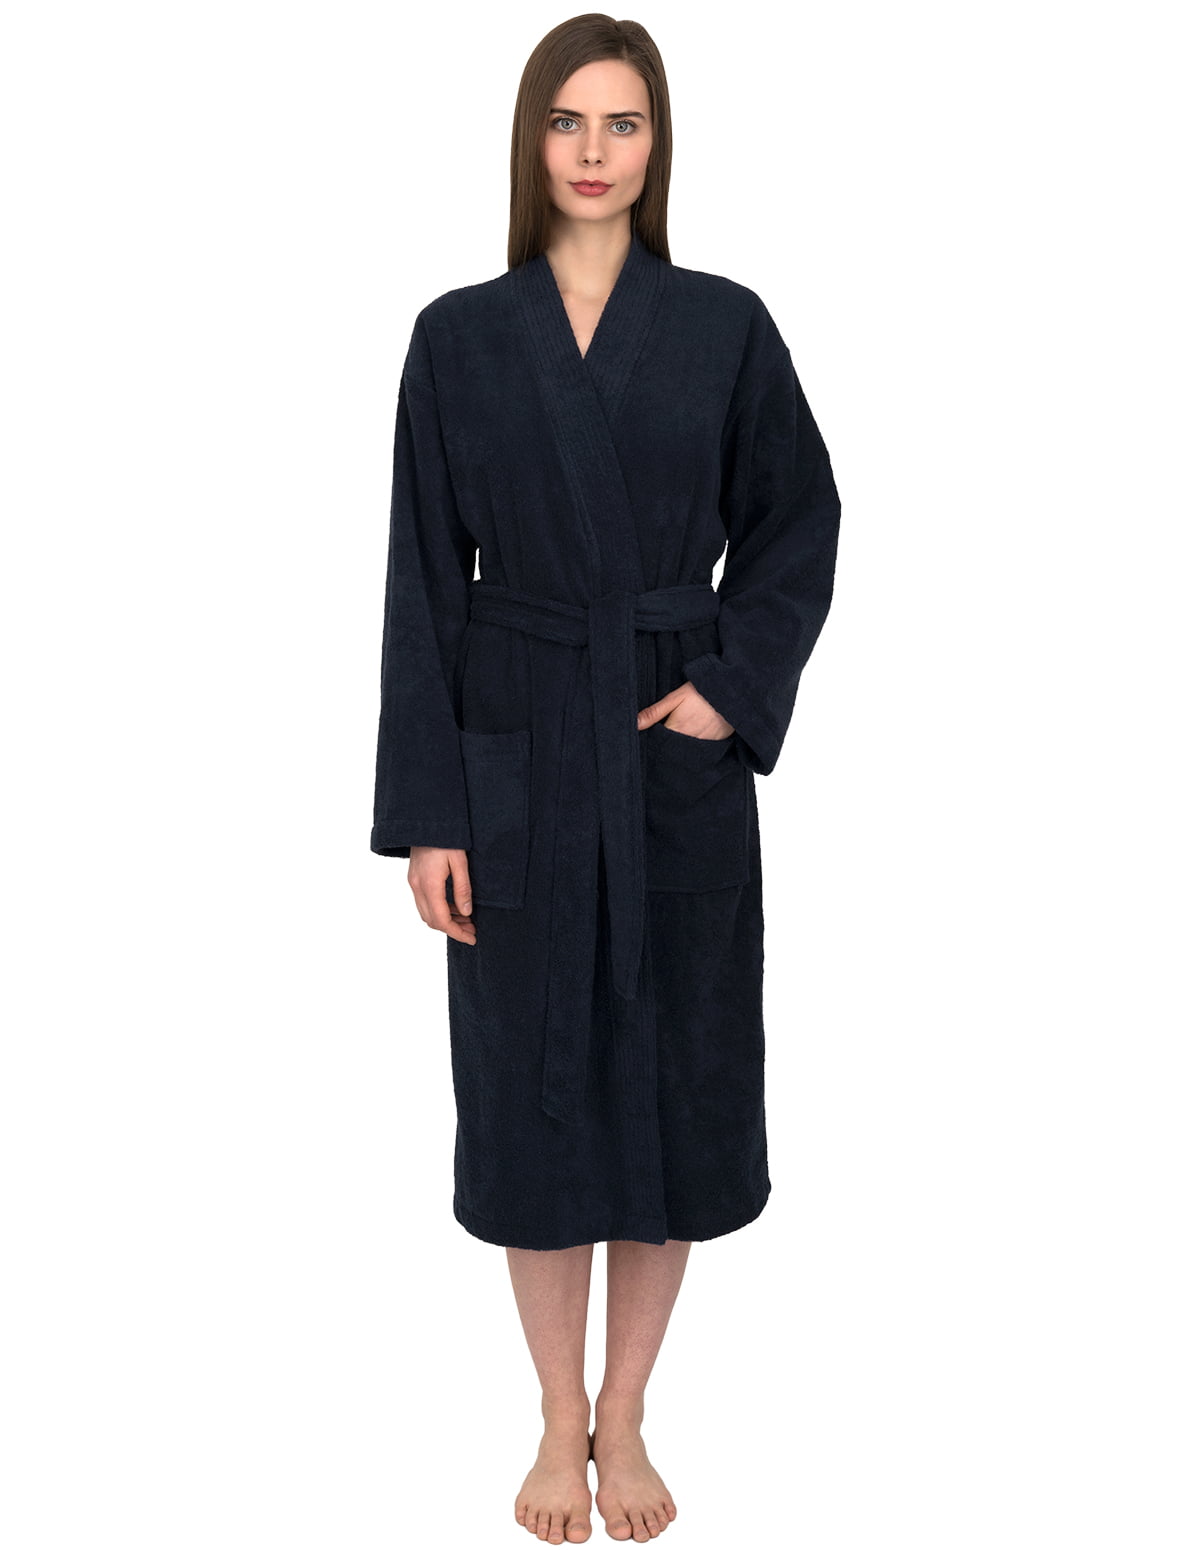 TowelSelections - TowelSelections Women's Robe, Low Twist Cotton Terry ...